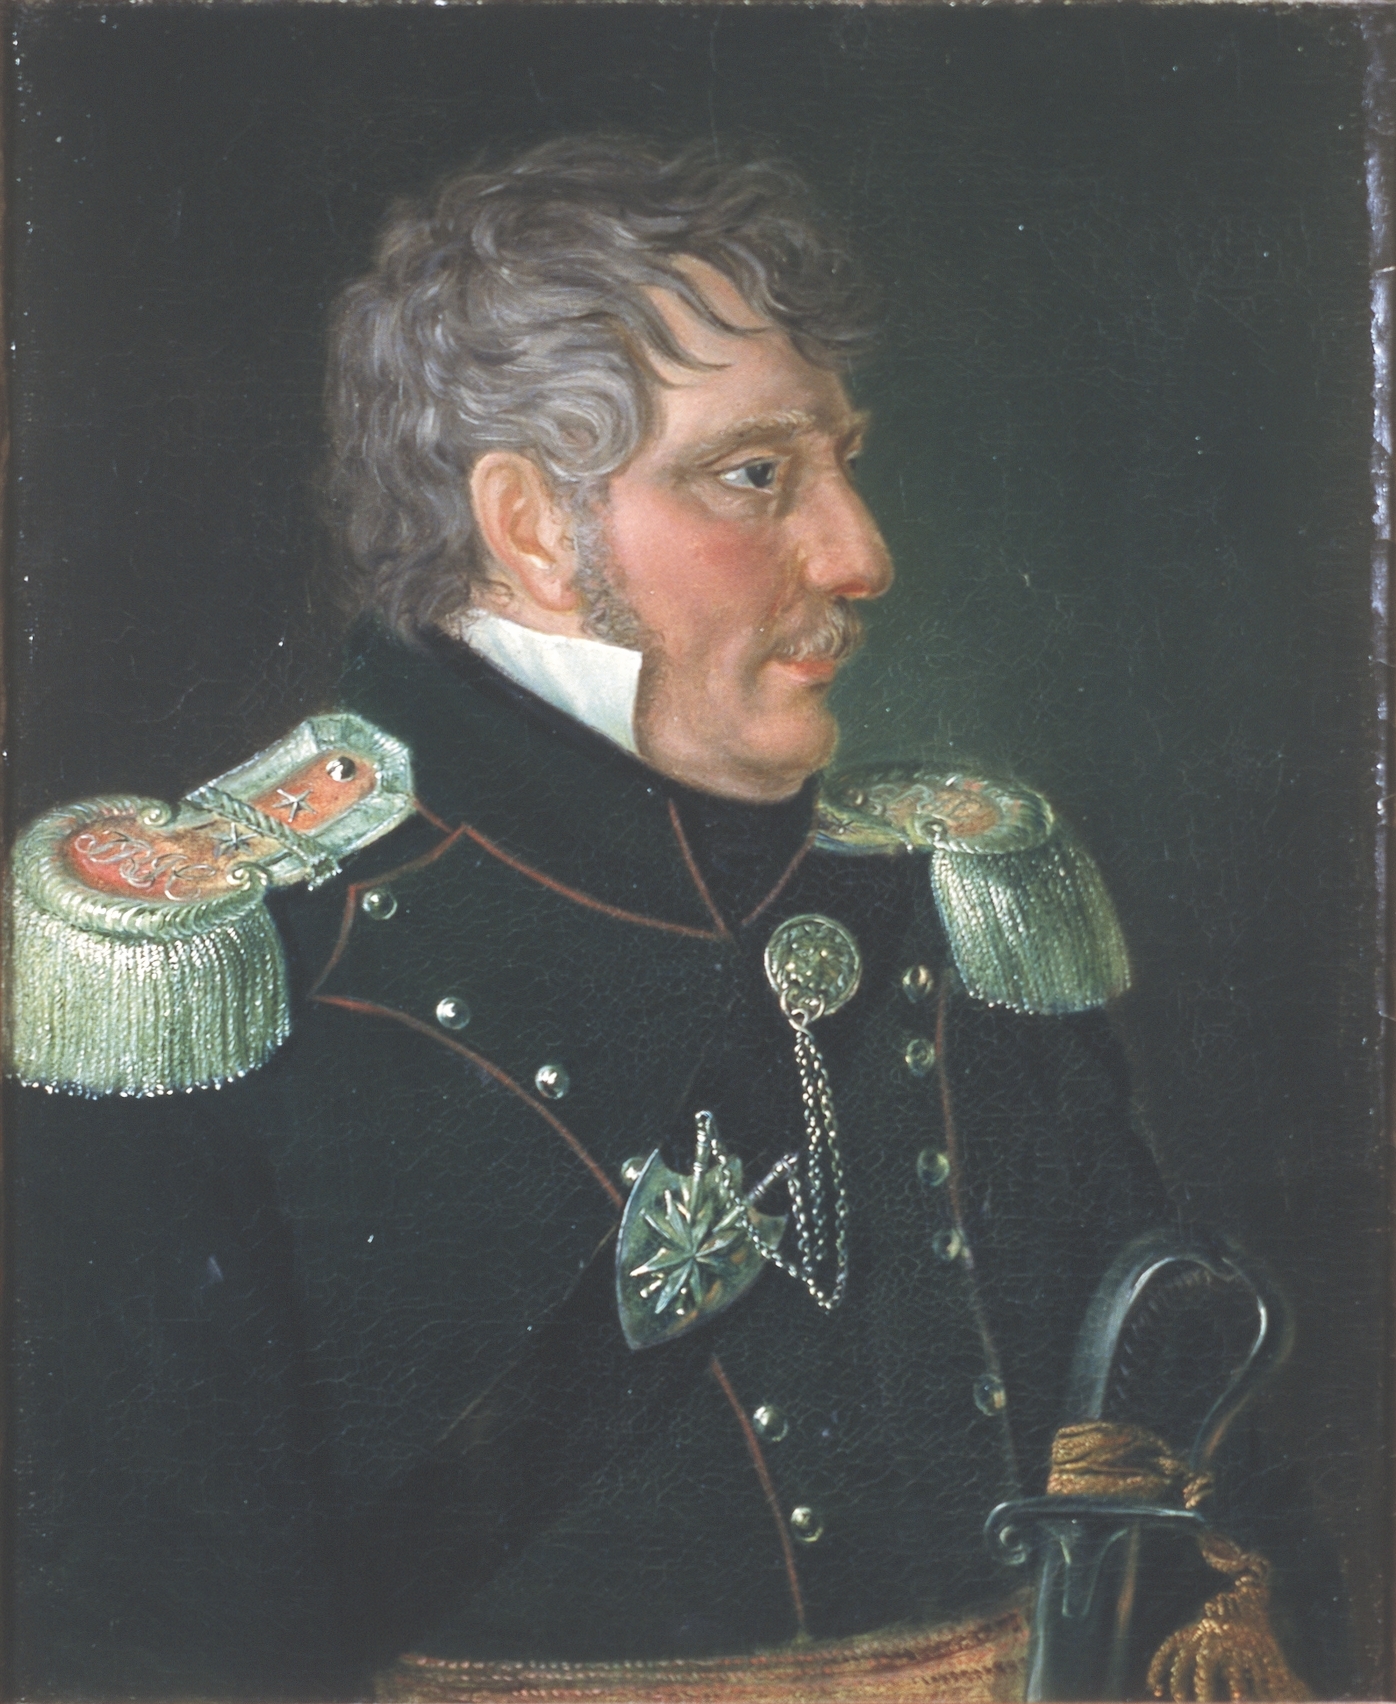 Frederik Heidmann officer, father of the Constitution of Norway and member of Stortinget